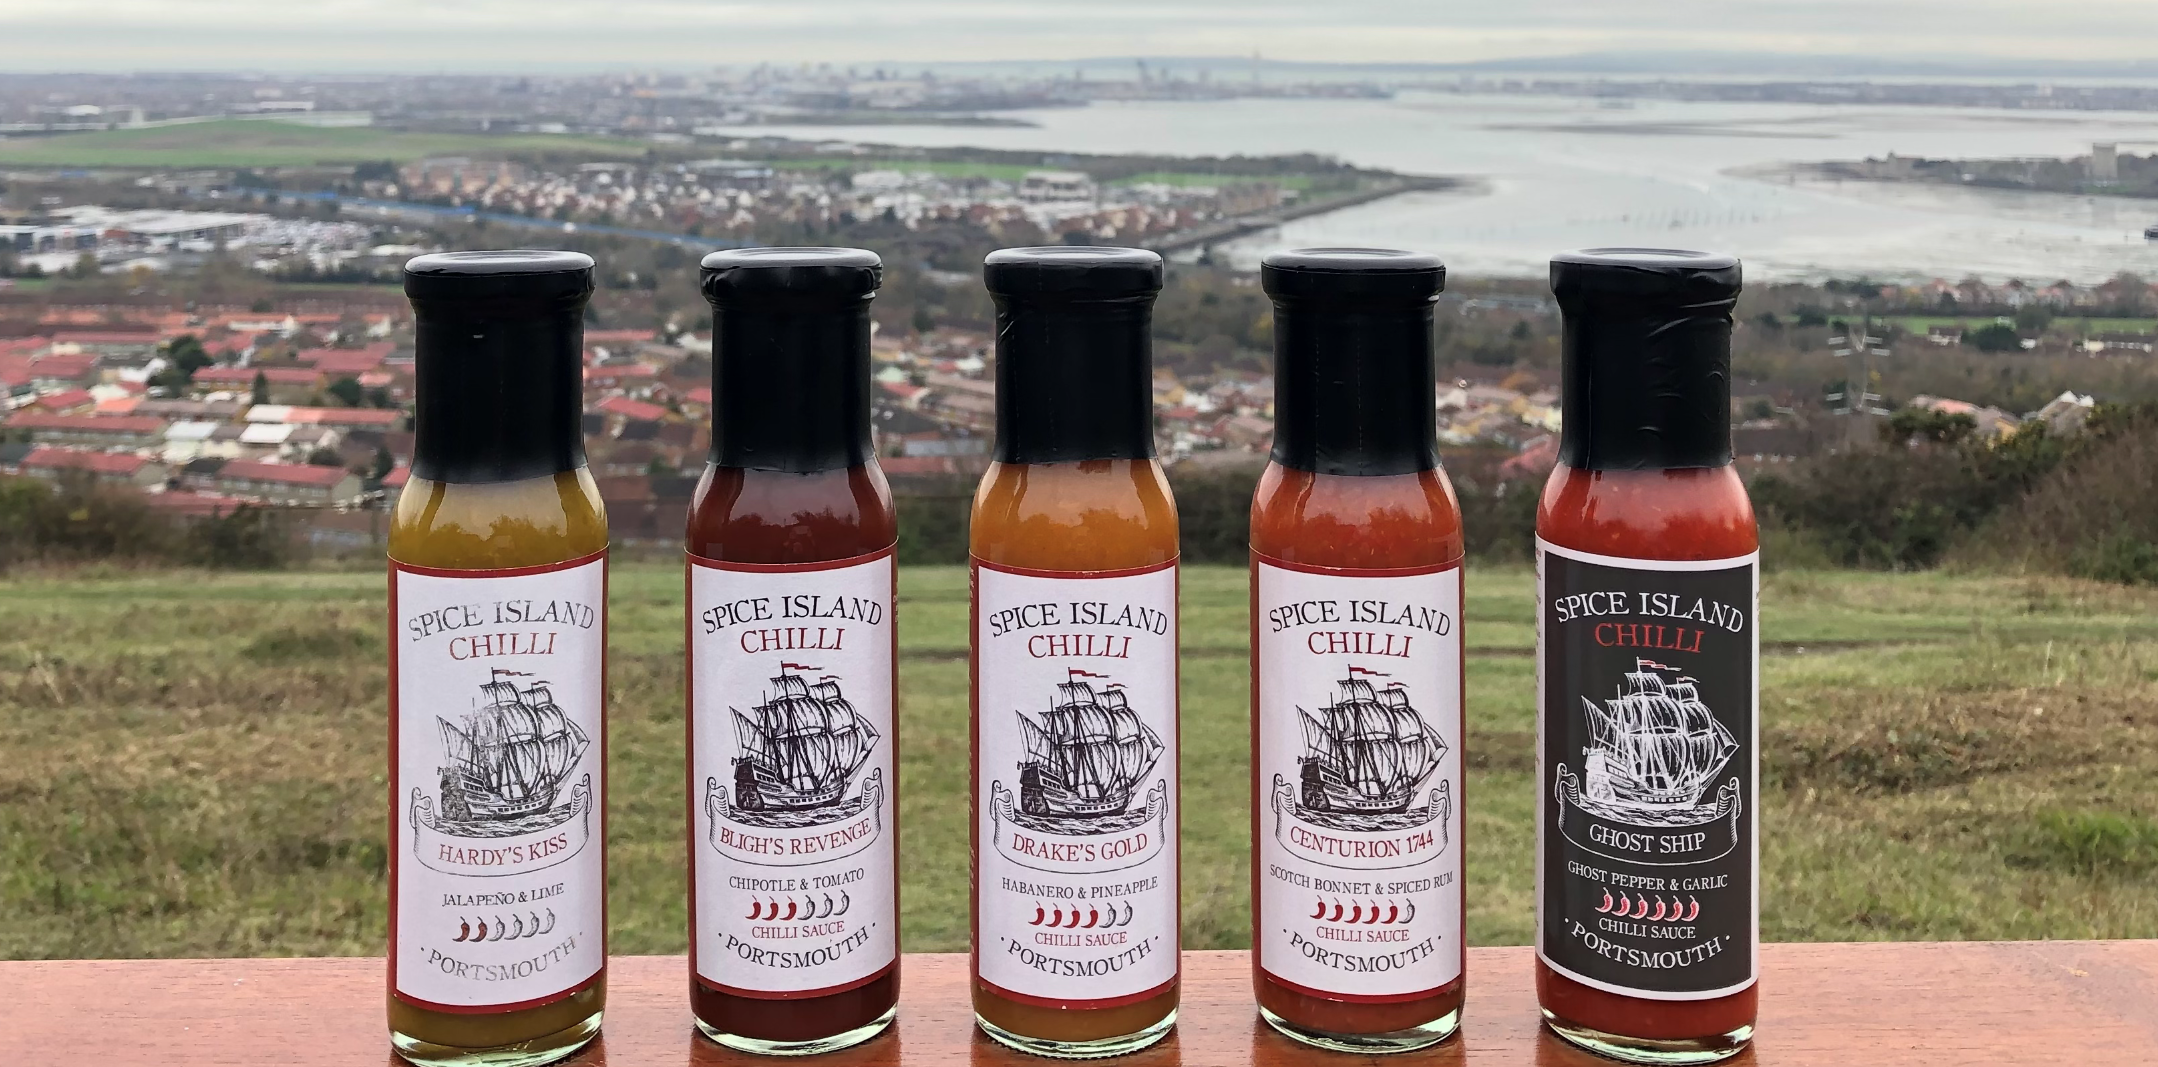 Portsmouth spice expands its reach across Hampshire